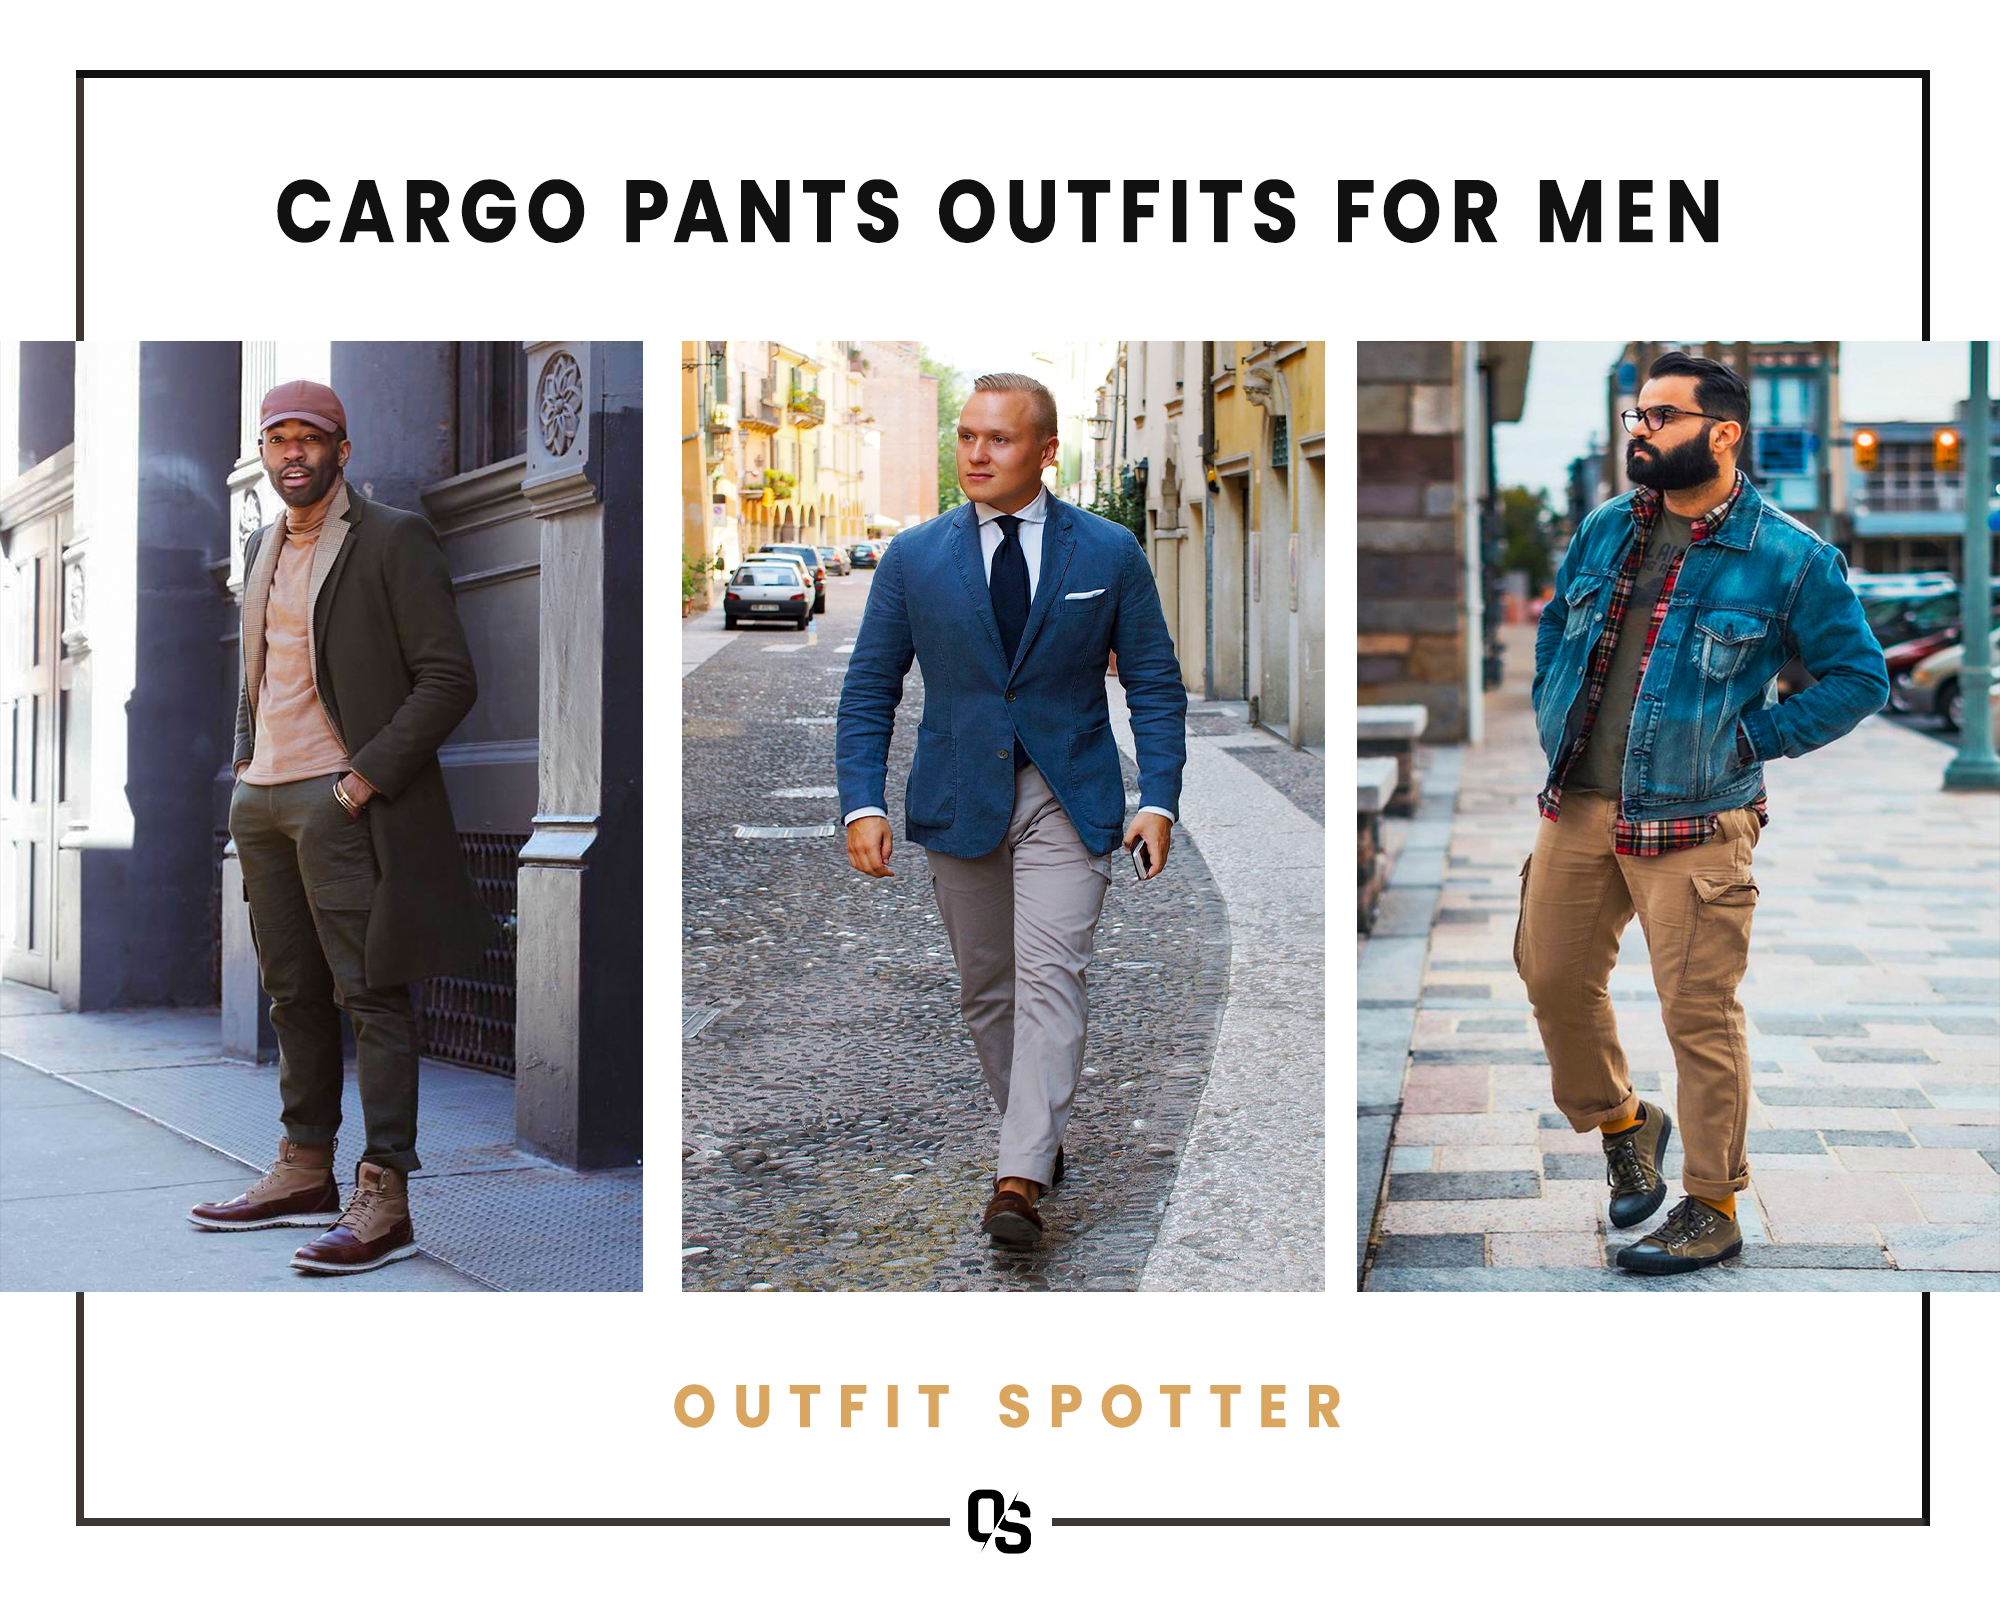 Different cargo pants outfits for men